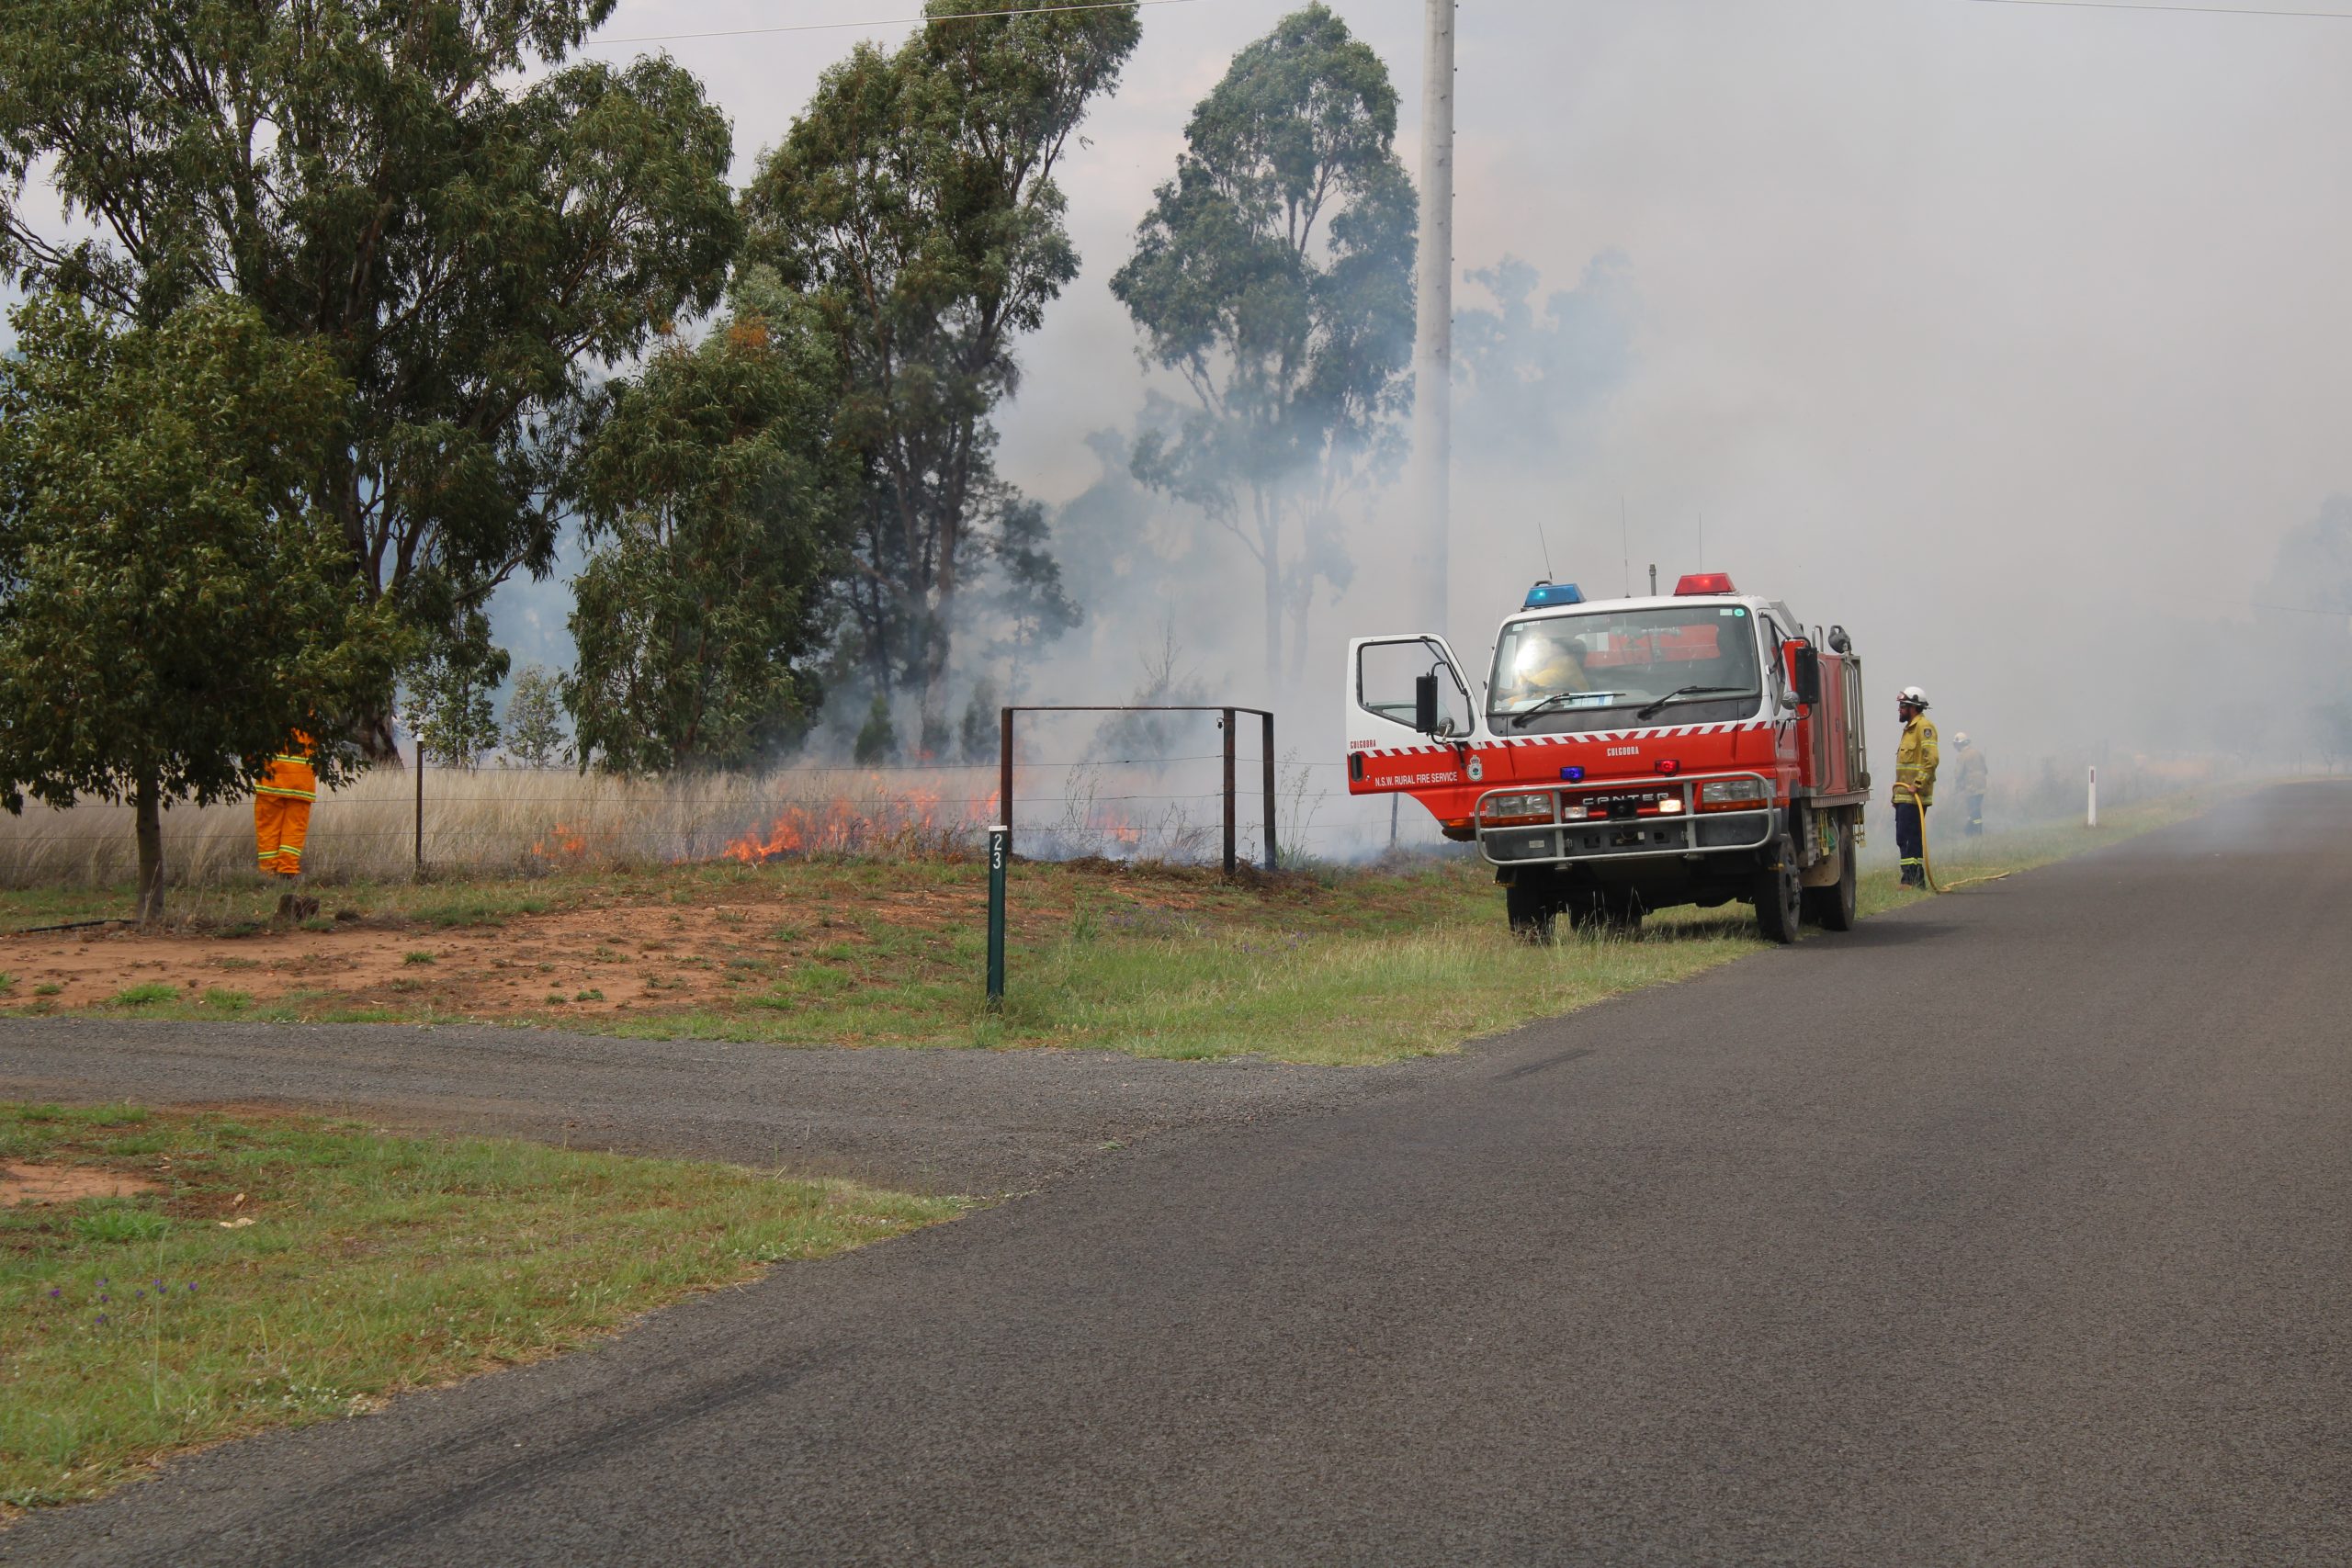 Be vigilant with growth, urges Rural Fire Service